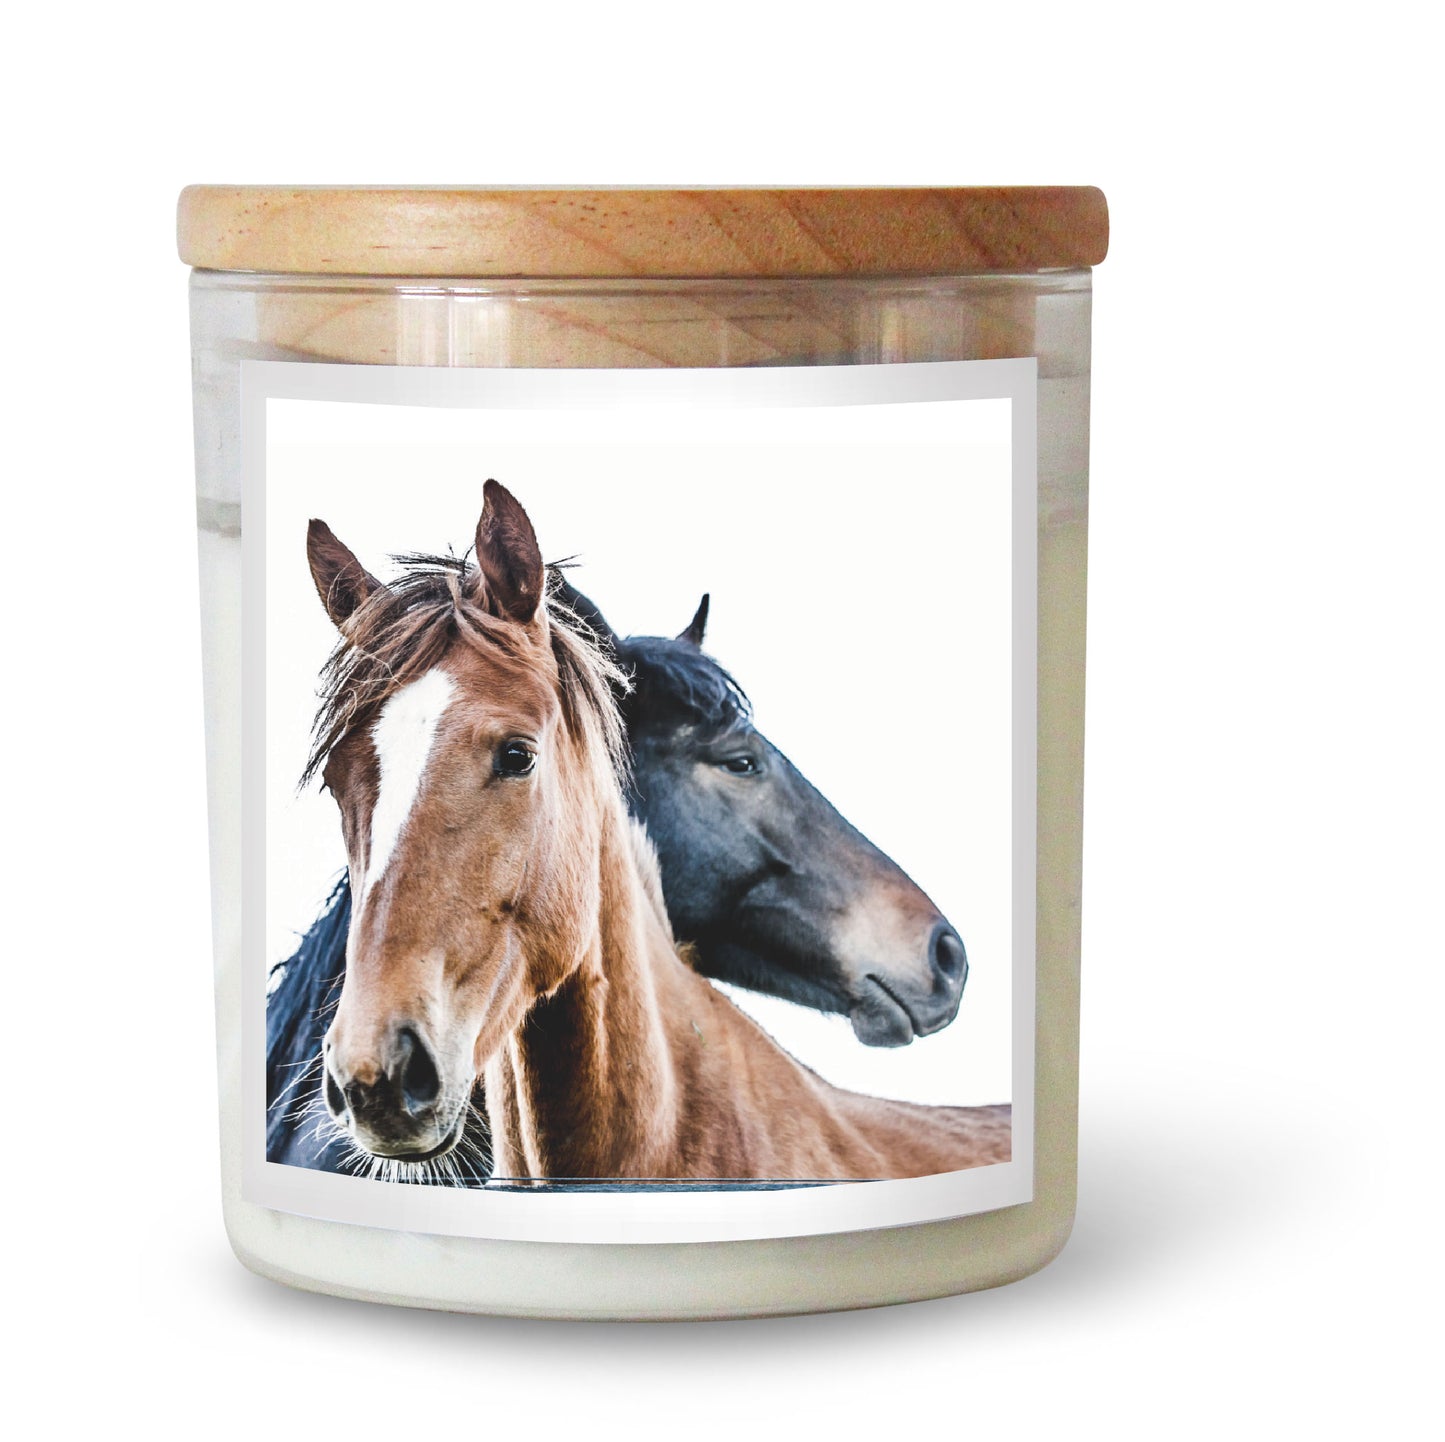 The Horse Candle